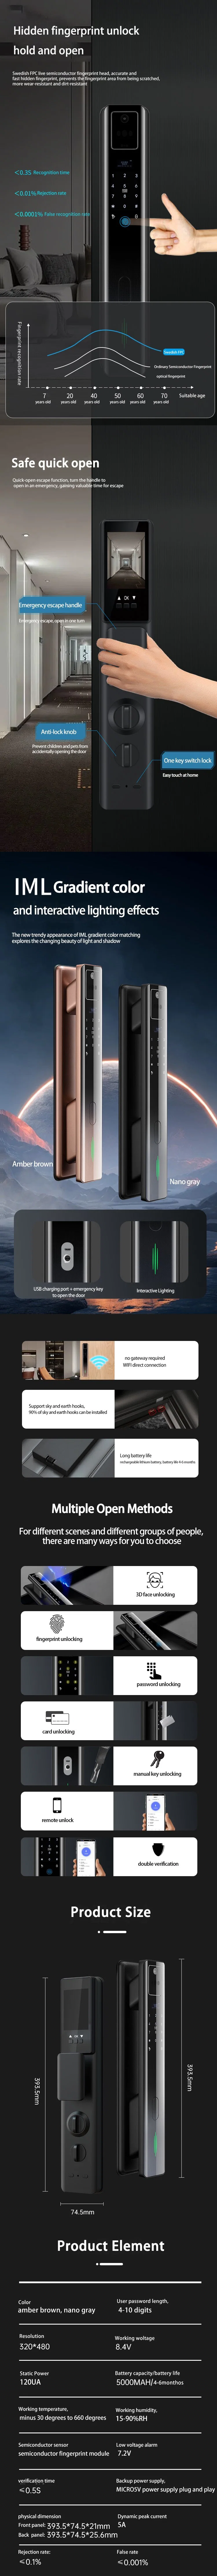 Tuya APP Voice Door Bell Call Biometric Electronic Magnetic Handle Locking Dual Smart Security Facial Recognition with Fingerprint Face Recognition Door Lock